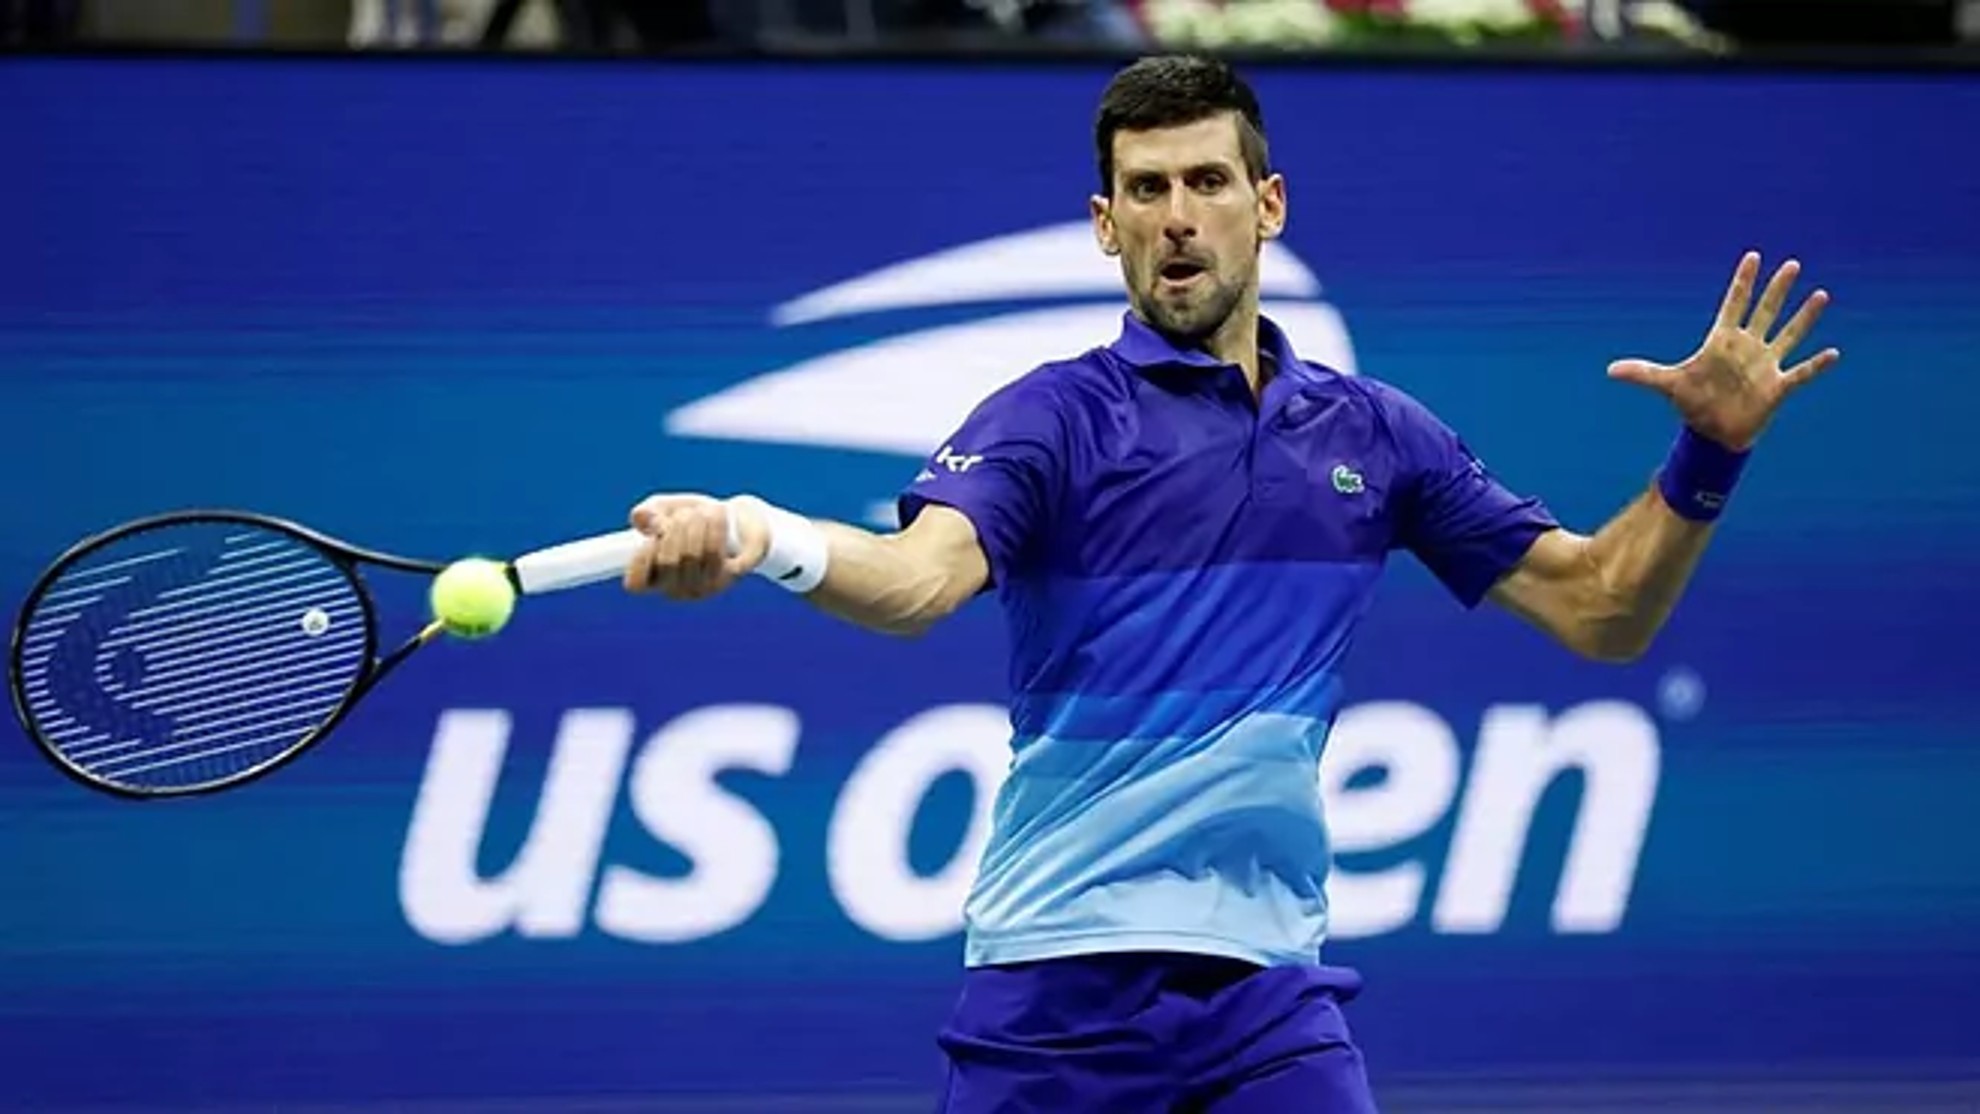 Djokovic's participation in Montreal Masters and US Open in doubt over vaccine stance